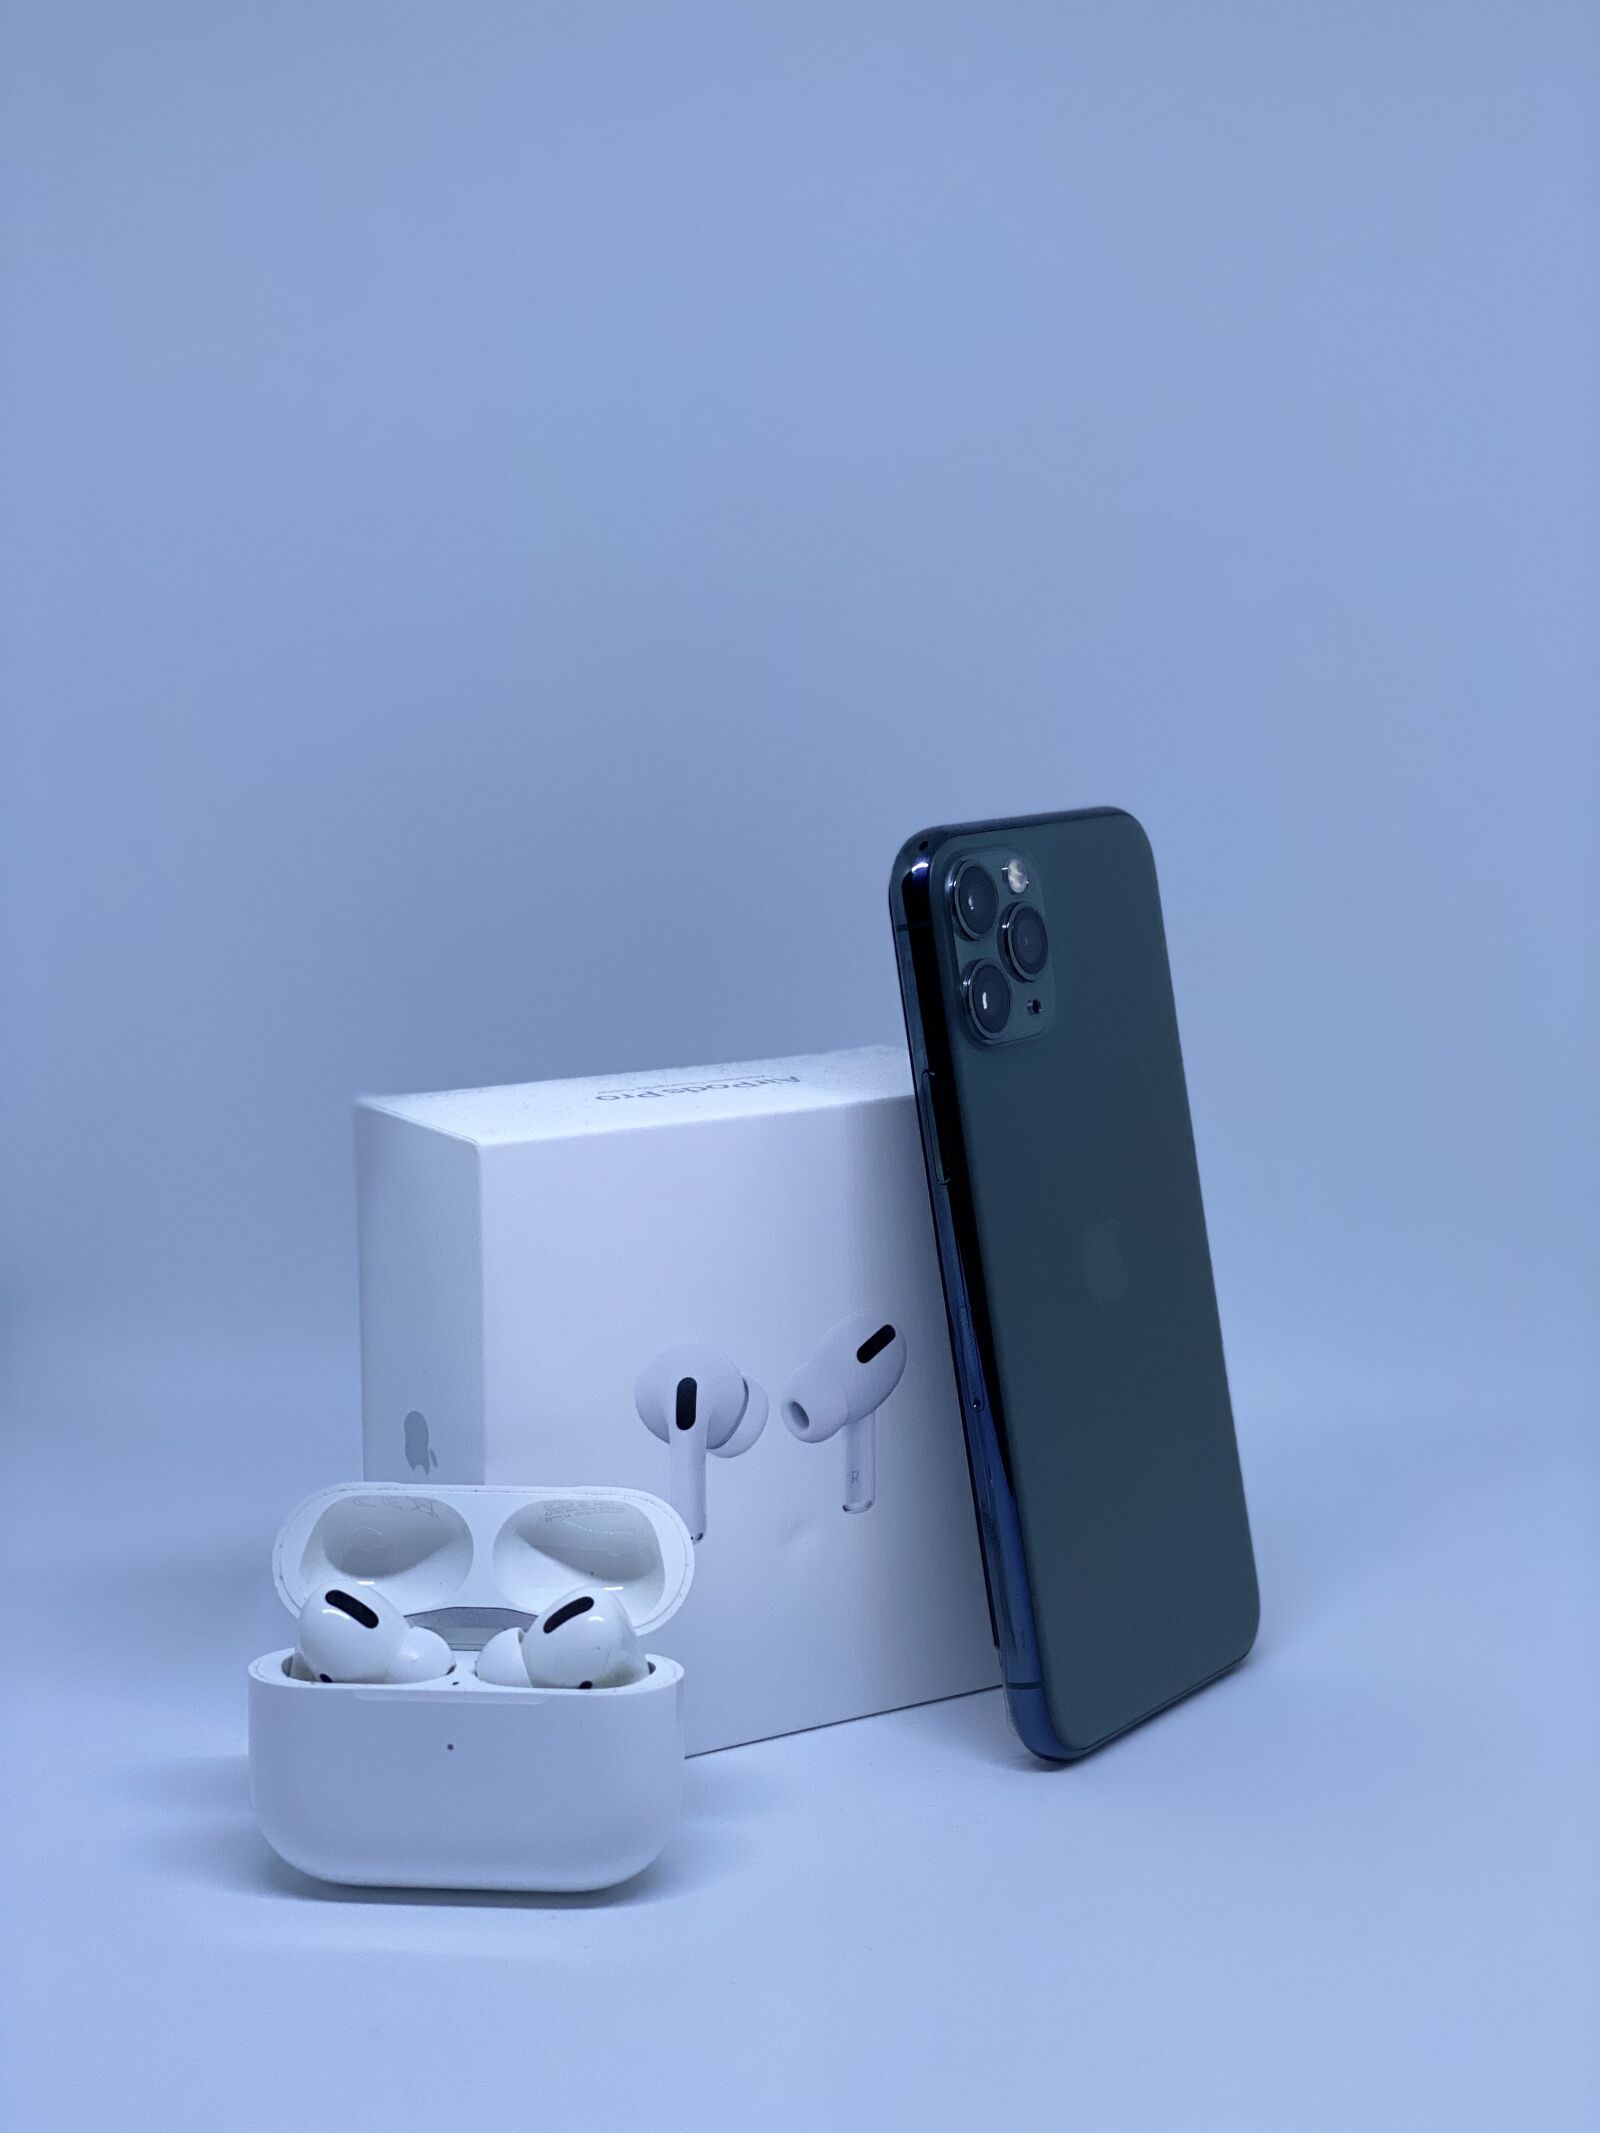 Apple iPhone 11 Pro sample photo. Iphone 11 pro, airpods photography